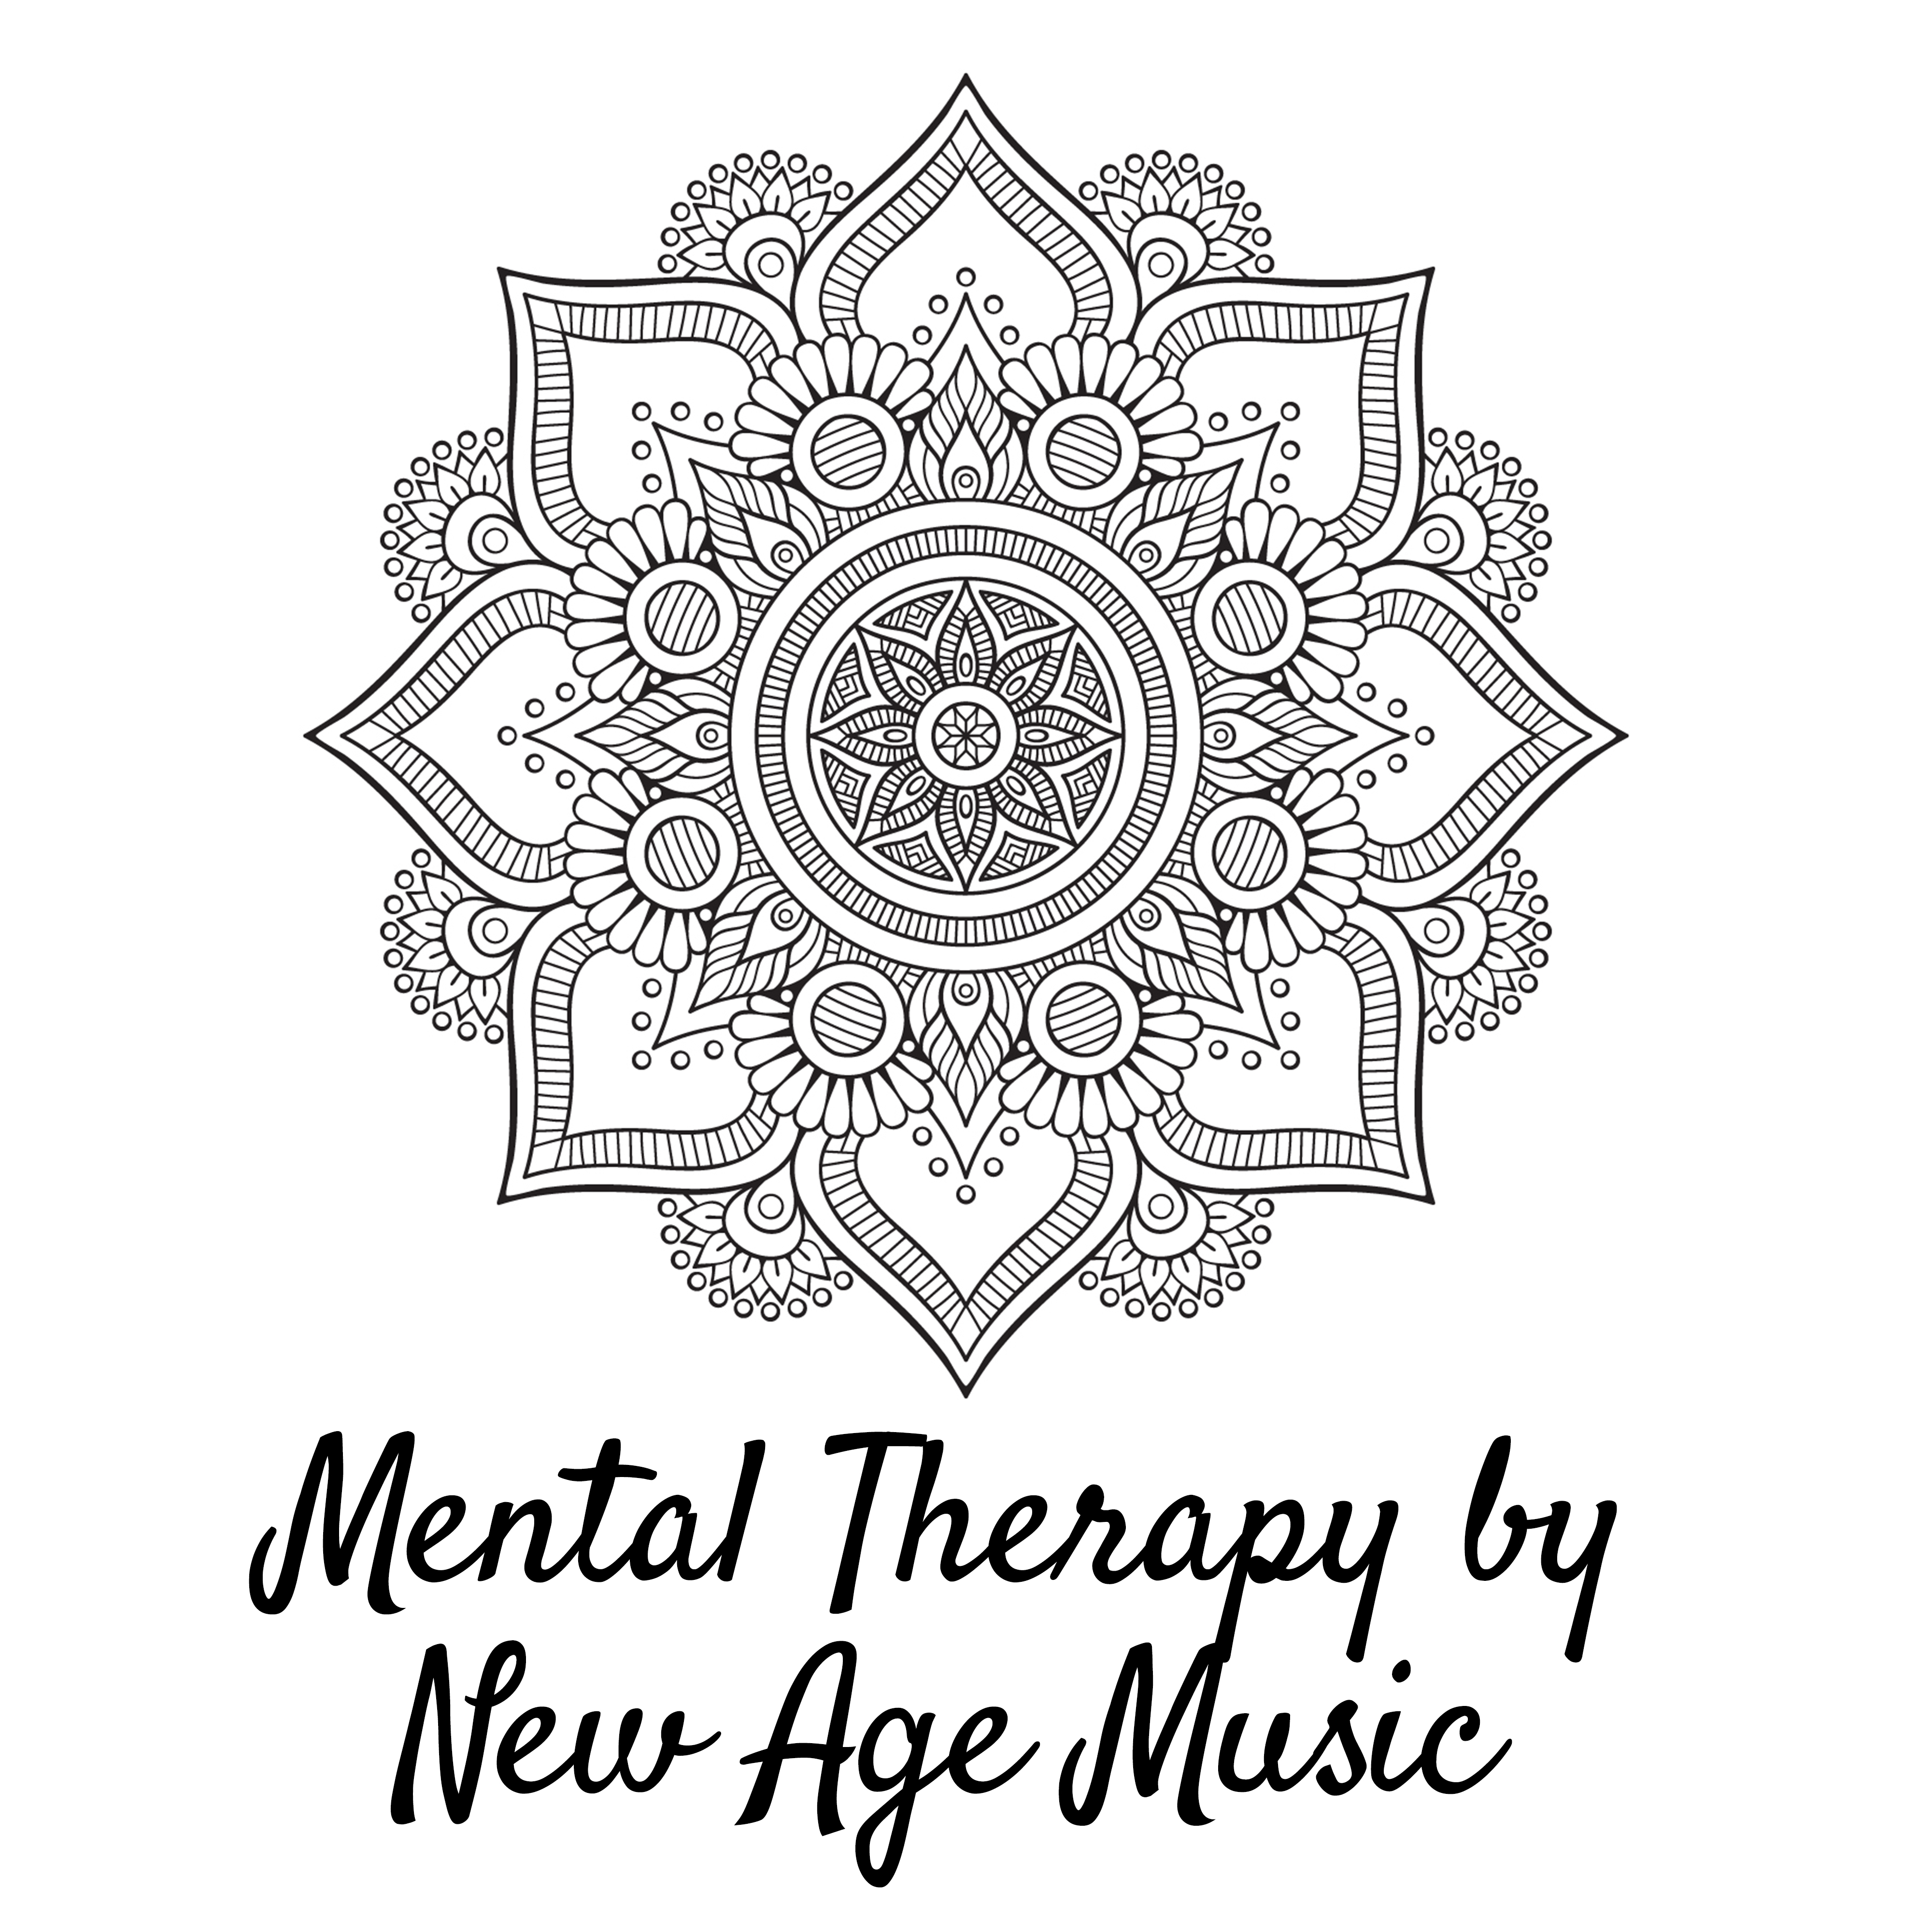 Mental Therapy by New Age Music